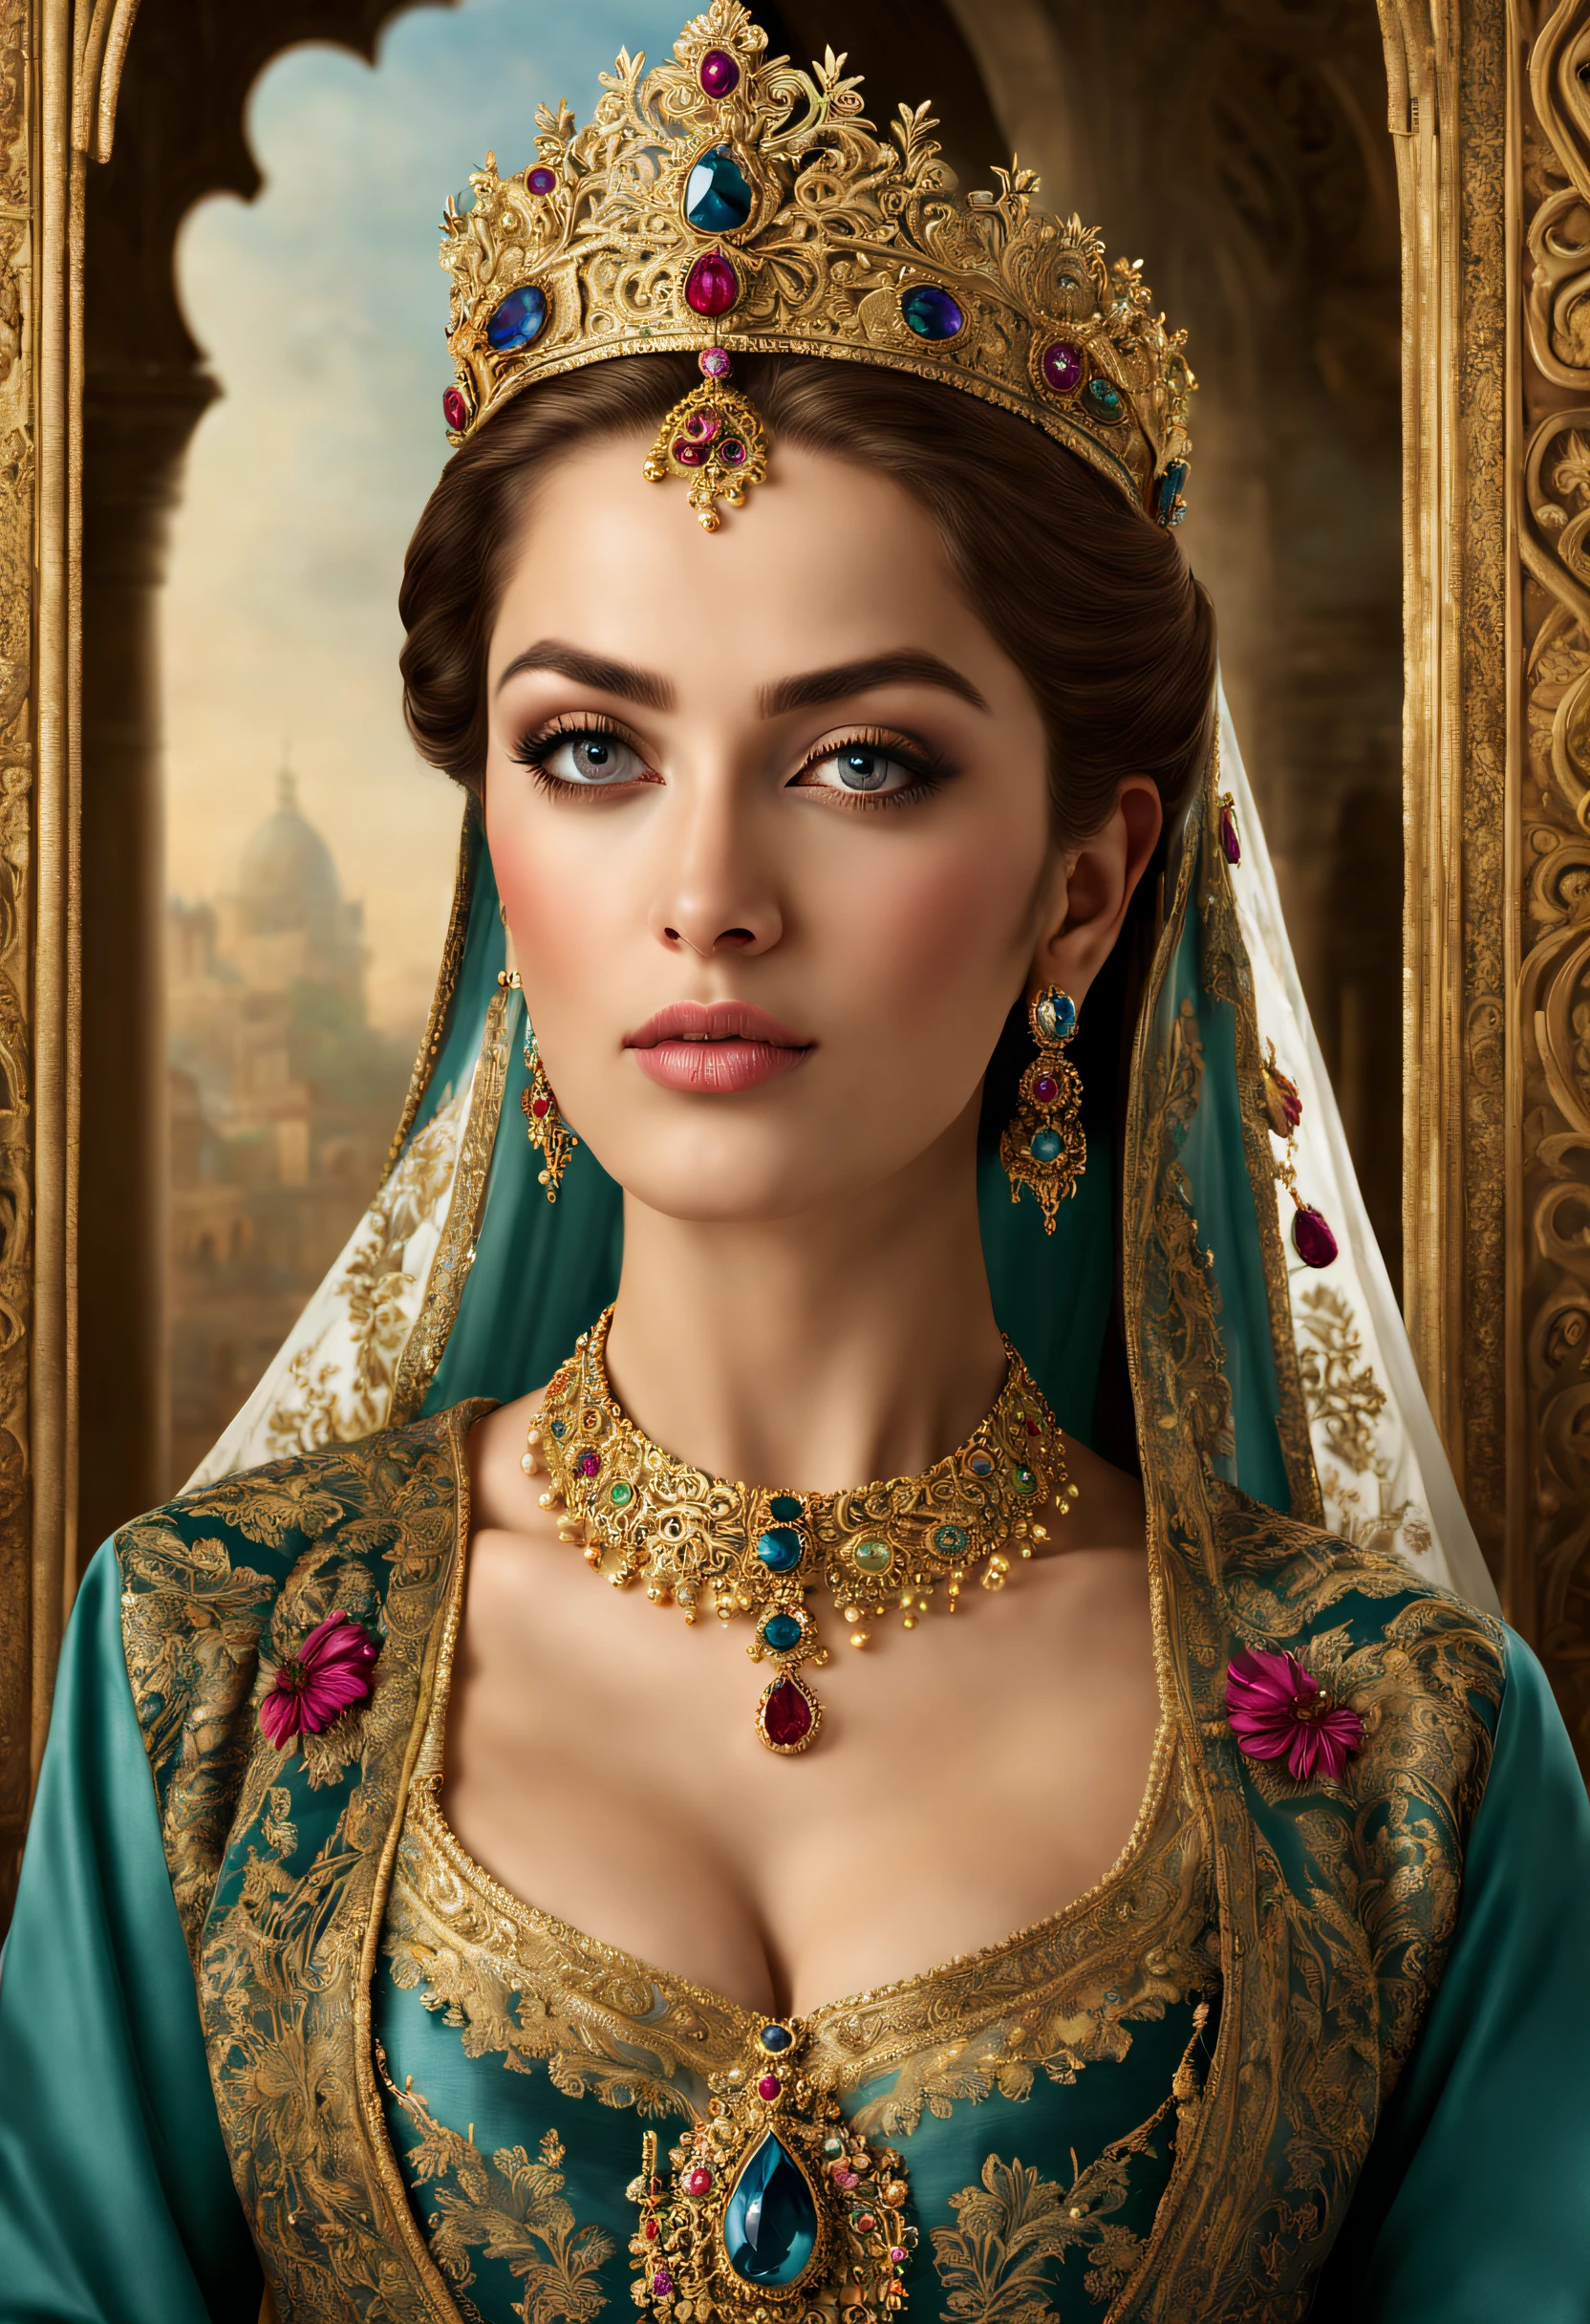 (best quality,4k,8k,highres,masterpiece:1.2),ultra-detailed,(realistic,photorealistic,photo-realistic:1.37),portrait:A stunning portrait of Roxelana, the powerful and influential wife of the Ottoman Sultan Suleiman the Magnificent. Roxelana's expressive, mesmerizing eyes captivate the viewers, with intricate details that bring them to life. Her graceful posture exudes confidence and strength. She is adorned with elaborate jewelry - a crown embellished with precious gemstones, and delicate earrings that sparkle in the light. Her lips are delicately painted, adding a touch of allure. The soft glow of natural light caresses her flawless complexion, beautifully highlighting every contour and feature of her face. The background is a rich tapestry, with vibrant hues and intricate patterns that symbolize her royal status. The painting embodies the timeless beauty and power of this historical figure, capturing her essence with utmost precision and artistry. [oil painting], [real gold leaf], [gemstone embellishments], [intricate lace details], [rich velvet fabrics], [exquisite silk brocade], [elegant floral motifs], [regal Byzantine throne], [ornate palace setting], [lush garden backdrop], [golden chandelier], [ethereal atmosphere], [subtle shadows], [masterful brushstrokes], [vivid colors], [baroque style], [dramatic lighting], [mysterious ambiance].